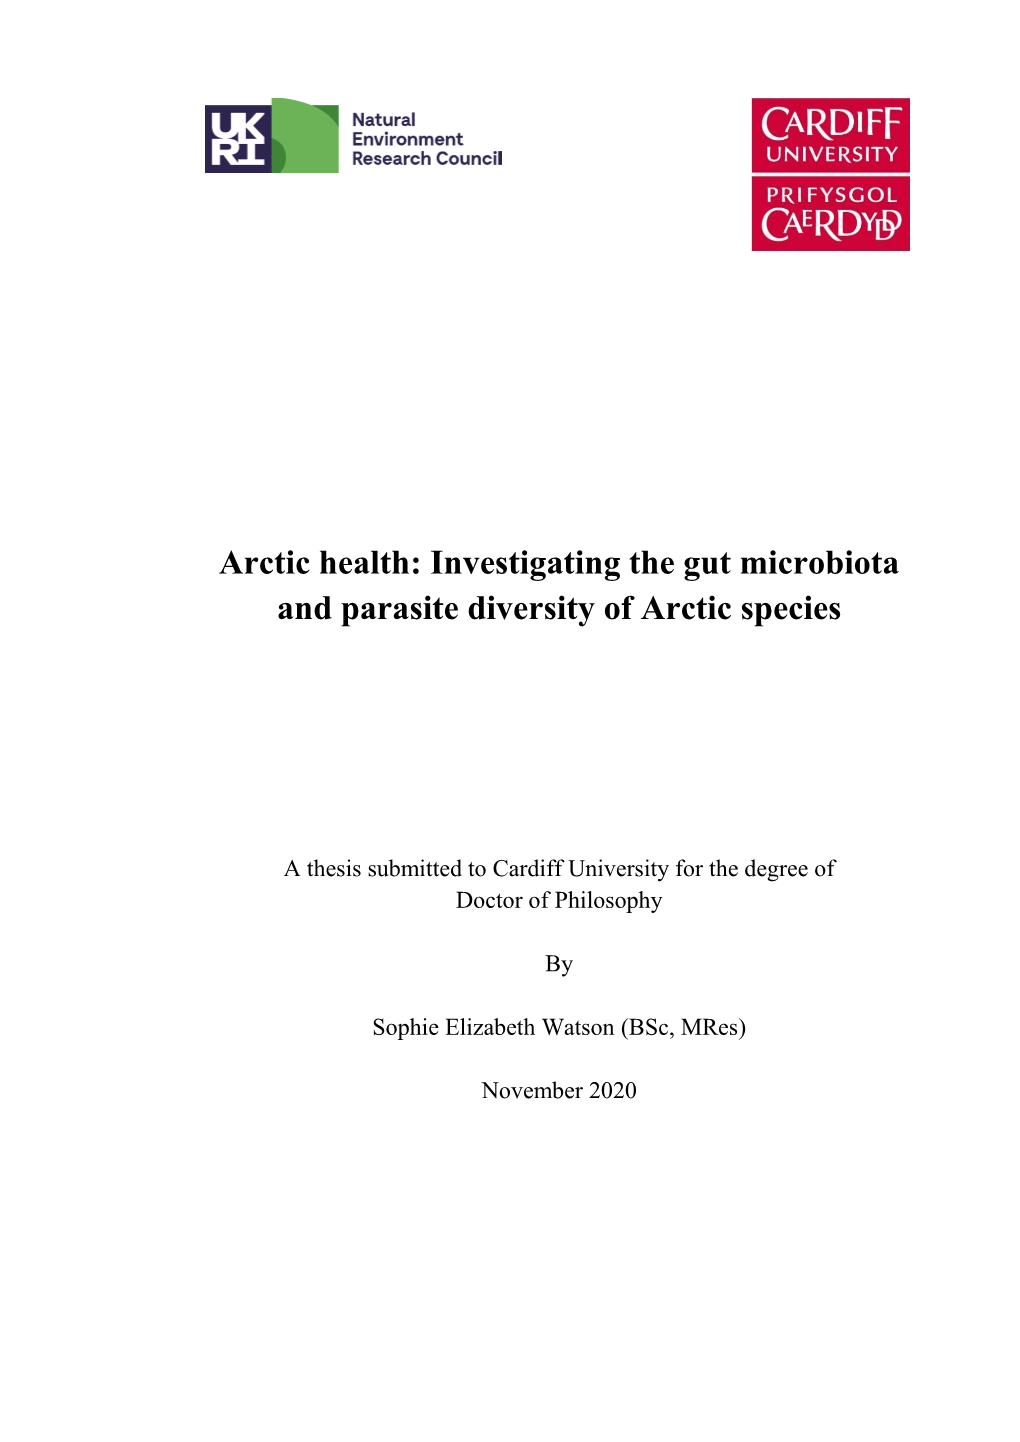 Investigating the Gut Microbiota and Parasite Diversity of Arctic Species